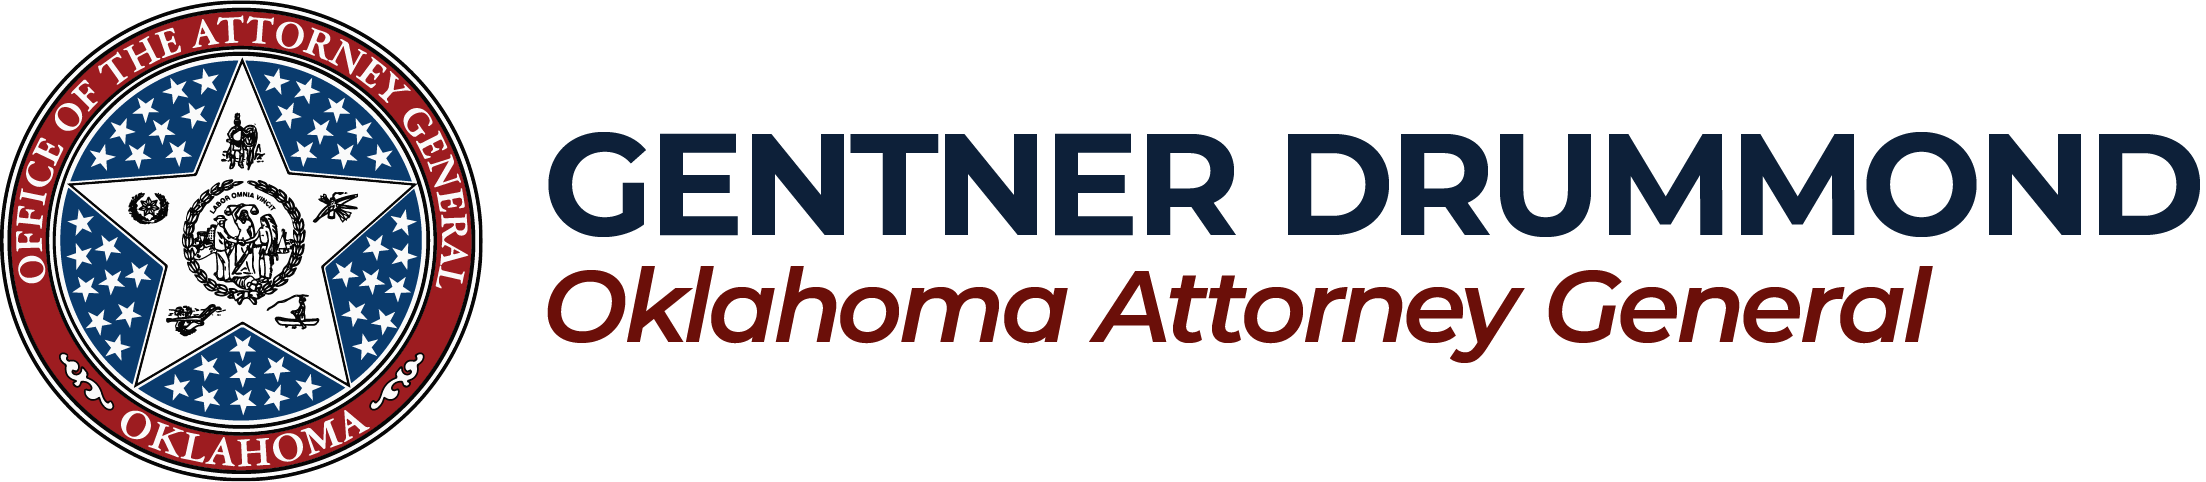 Oklahoma Attorney General Home page